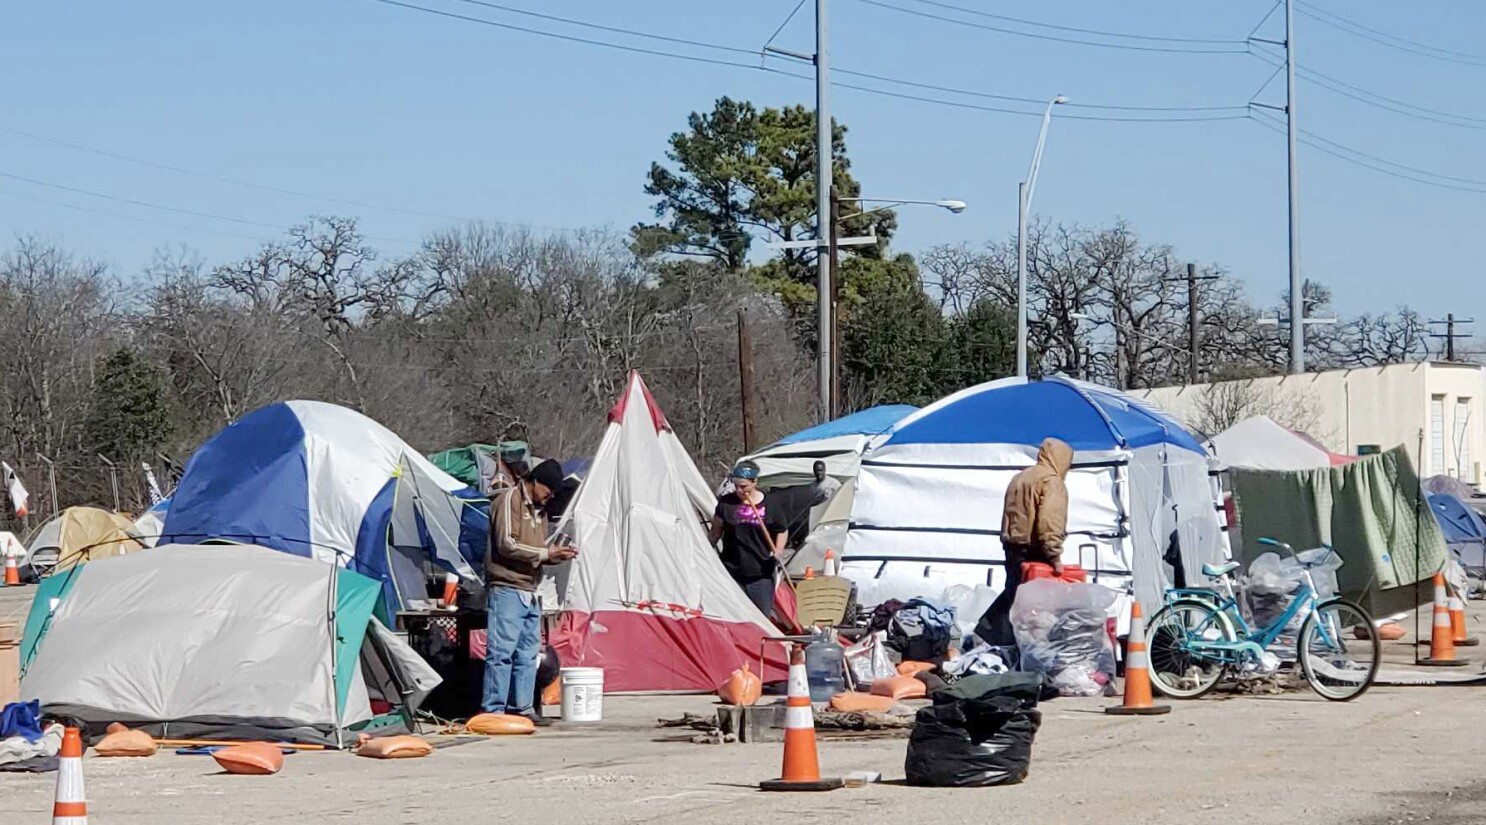 Some Texans Blame California For Homelessness In Austin Los Angeles Times